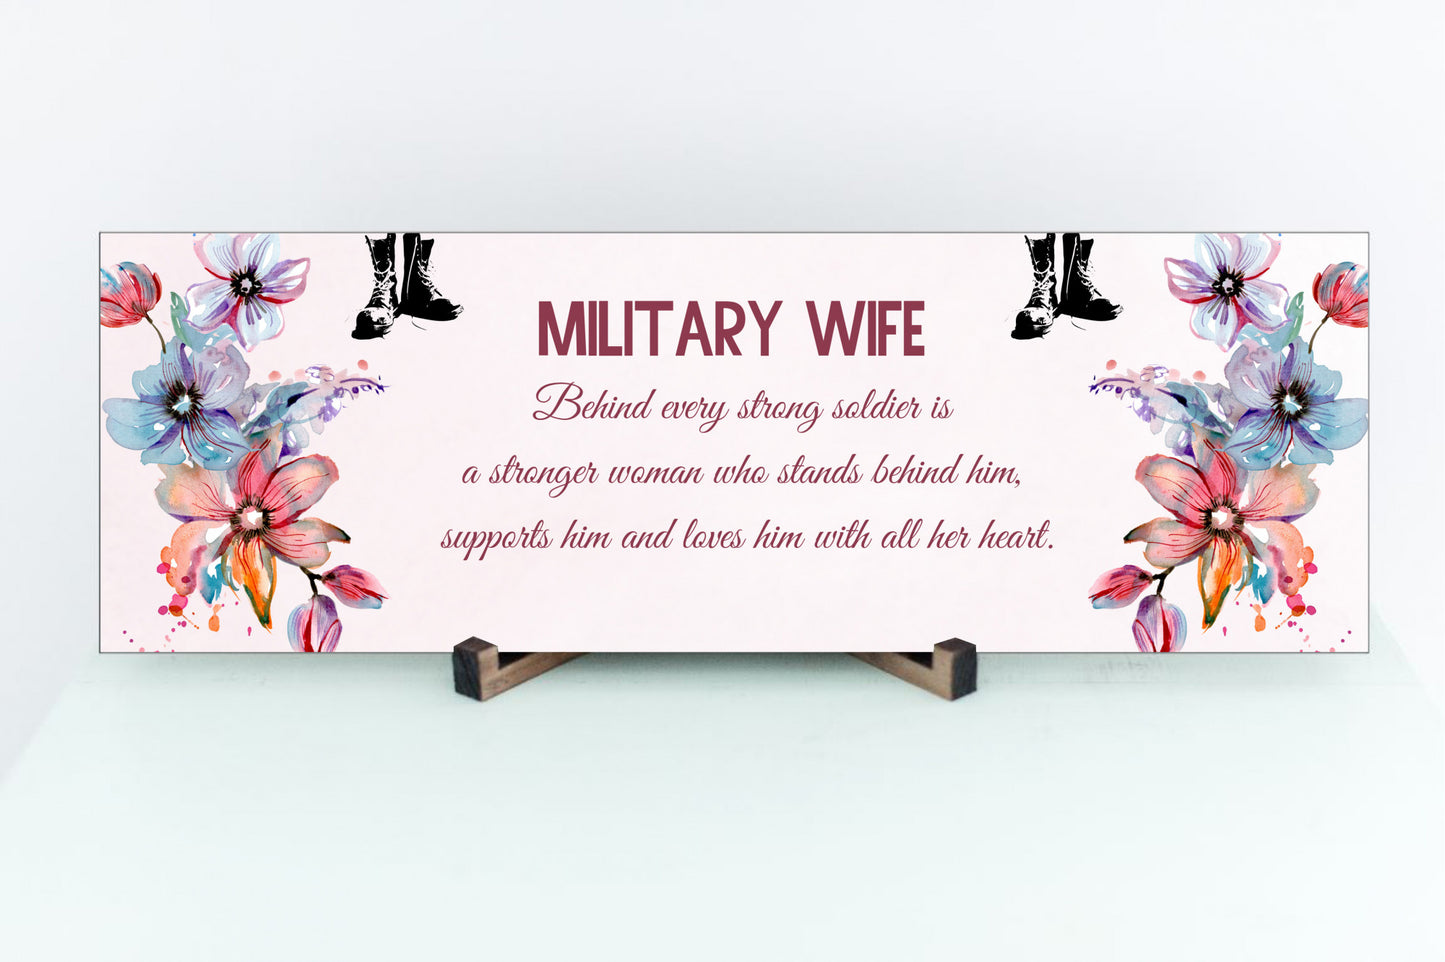 Military Wife Behind Every Strong Soldier Wall or Table Display Sign